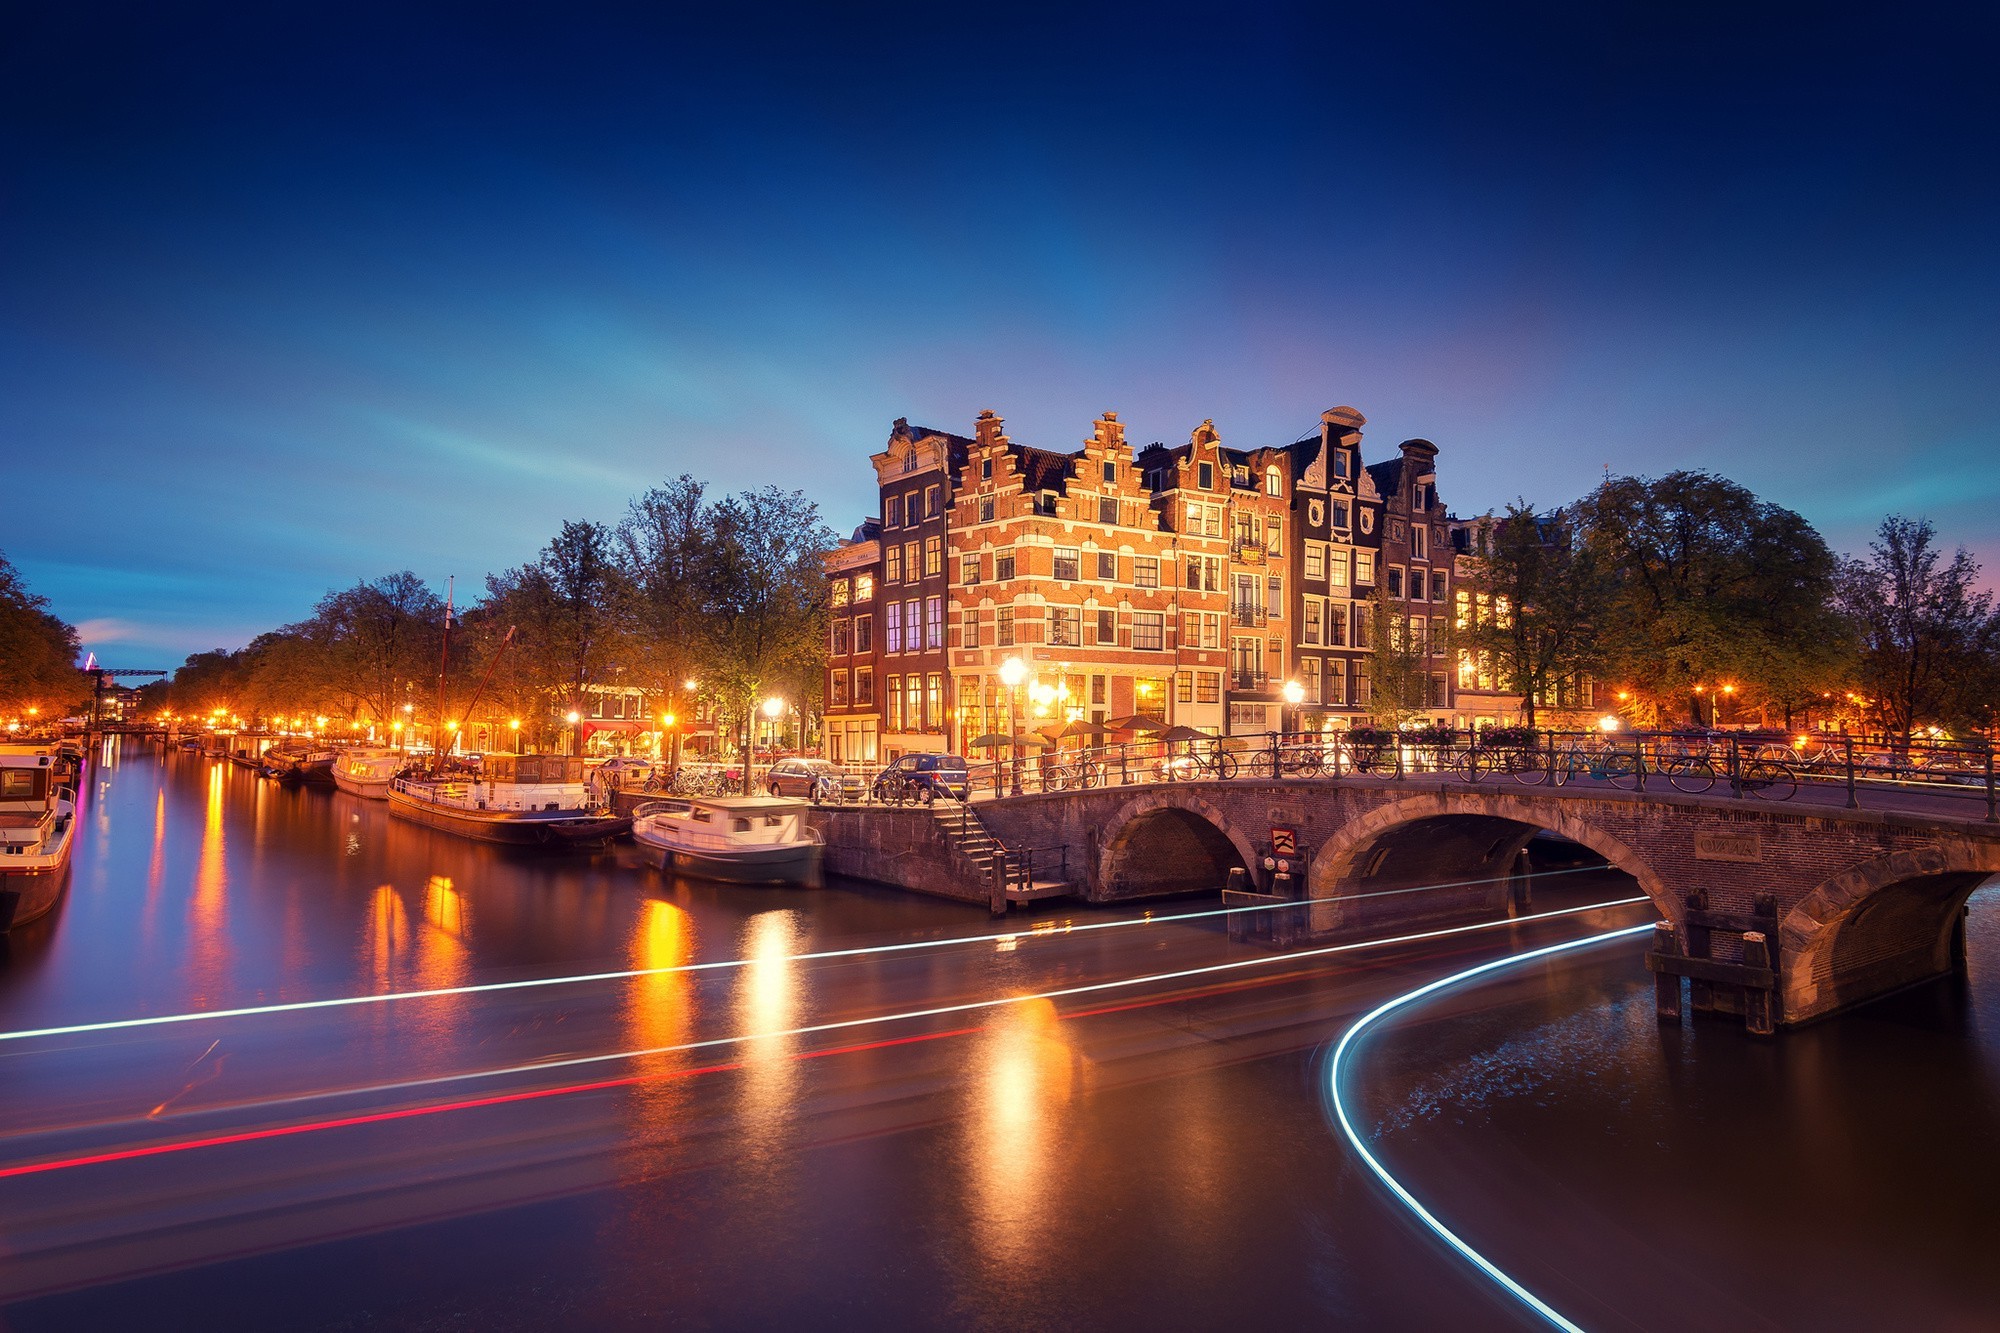 cityscape, Night, Lights, Architecture, Old building, Sky, Water, Reflection, Long exposure, Boat, Amsterdam, Netherlands, Bridge, Trees, Light trails Wallpaper